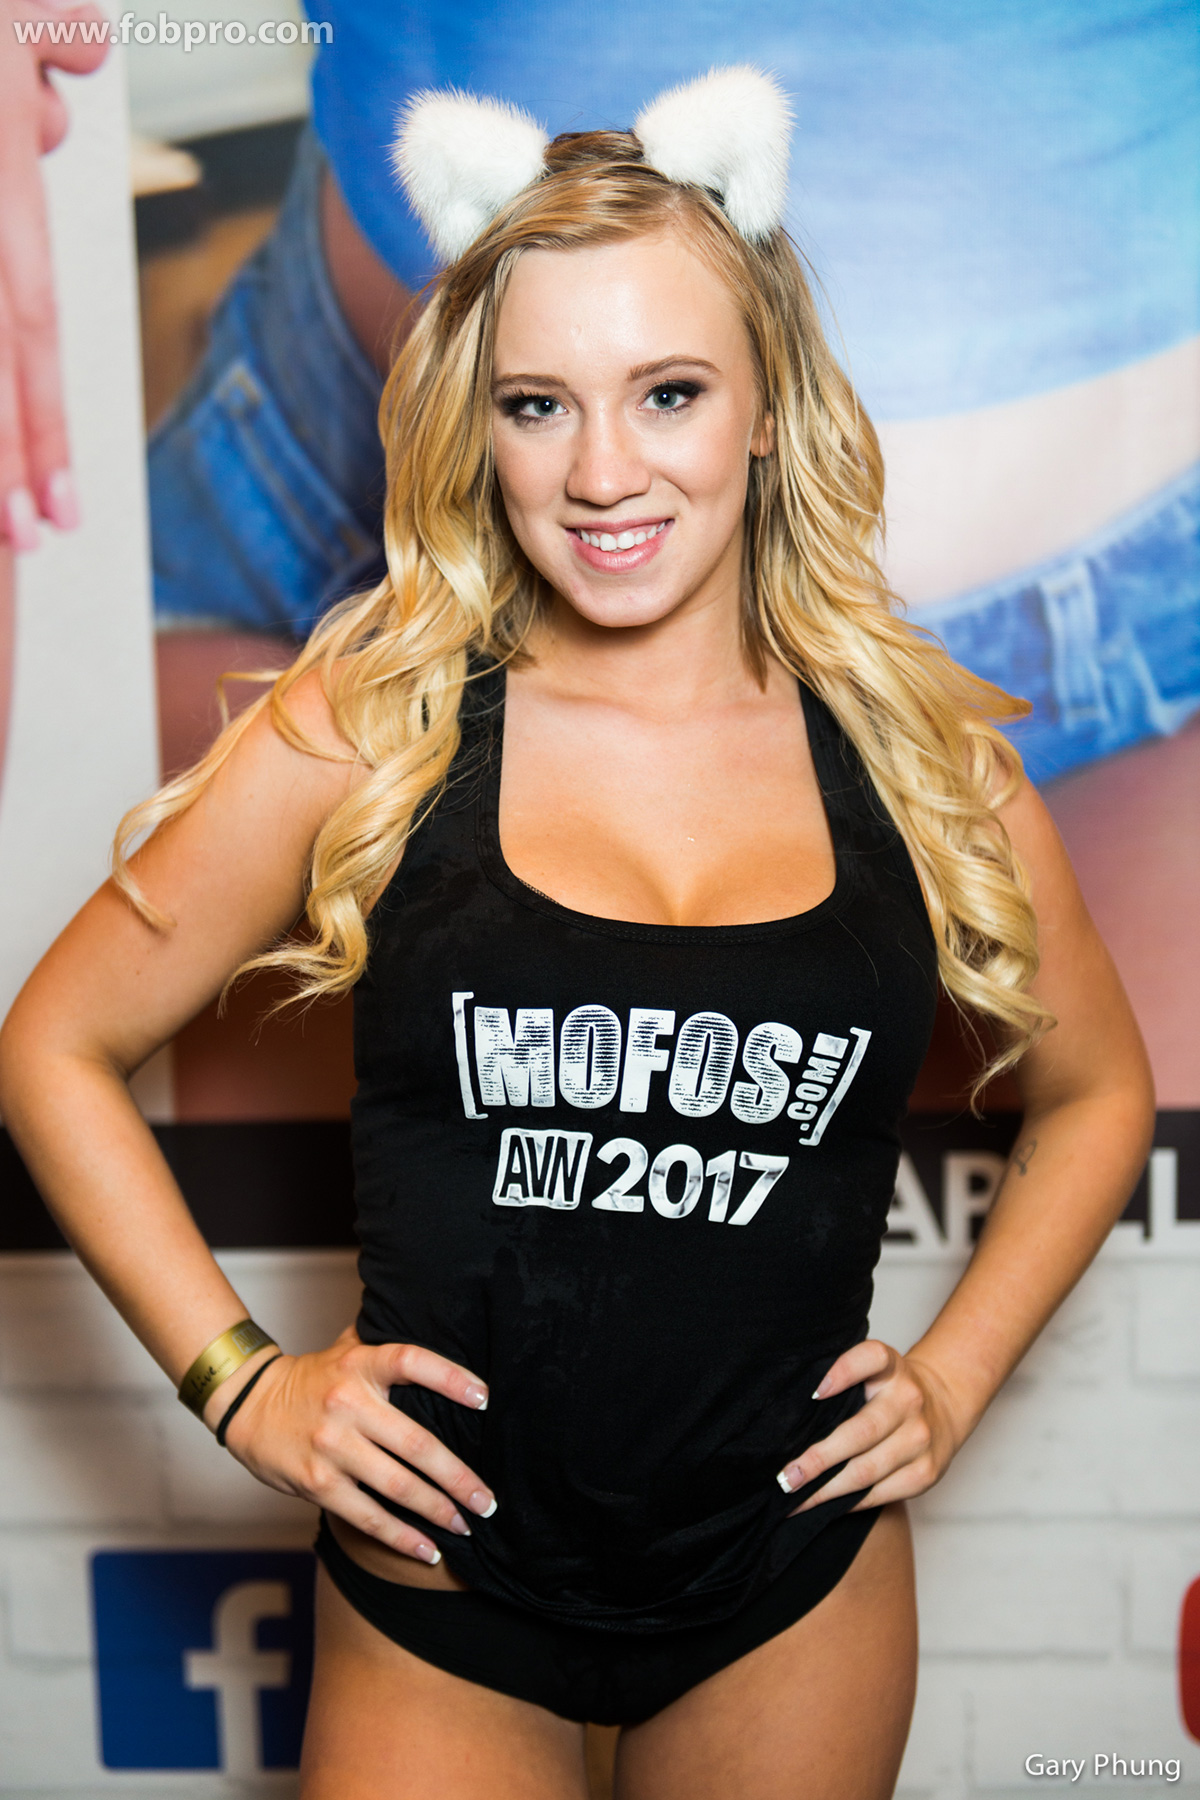 Avn Adult Entertainment Expo 2017 Day 2 Page 8 Of 38 Fob Productions